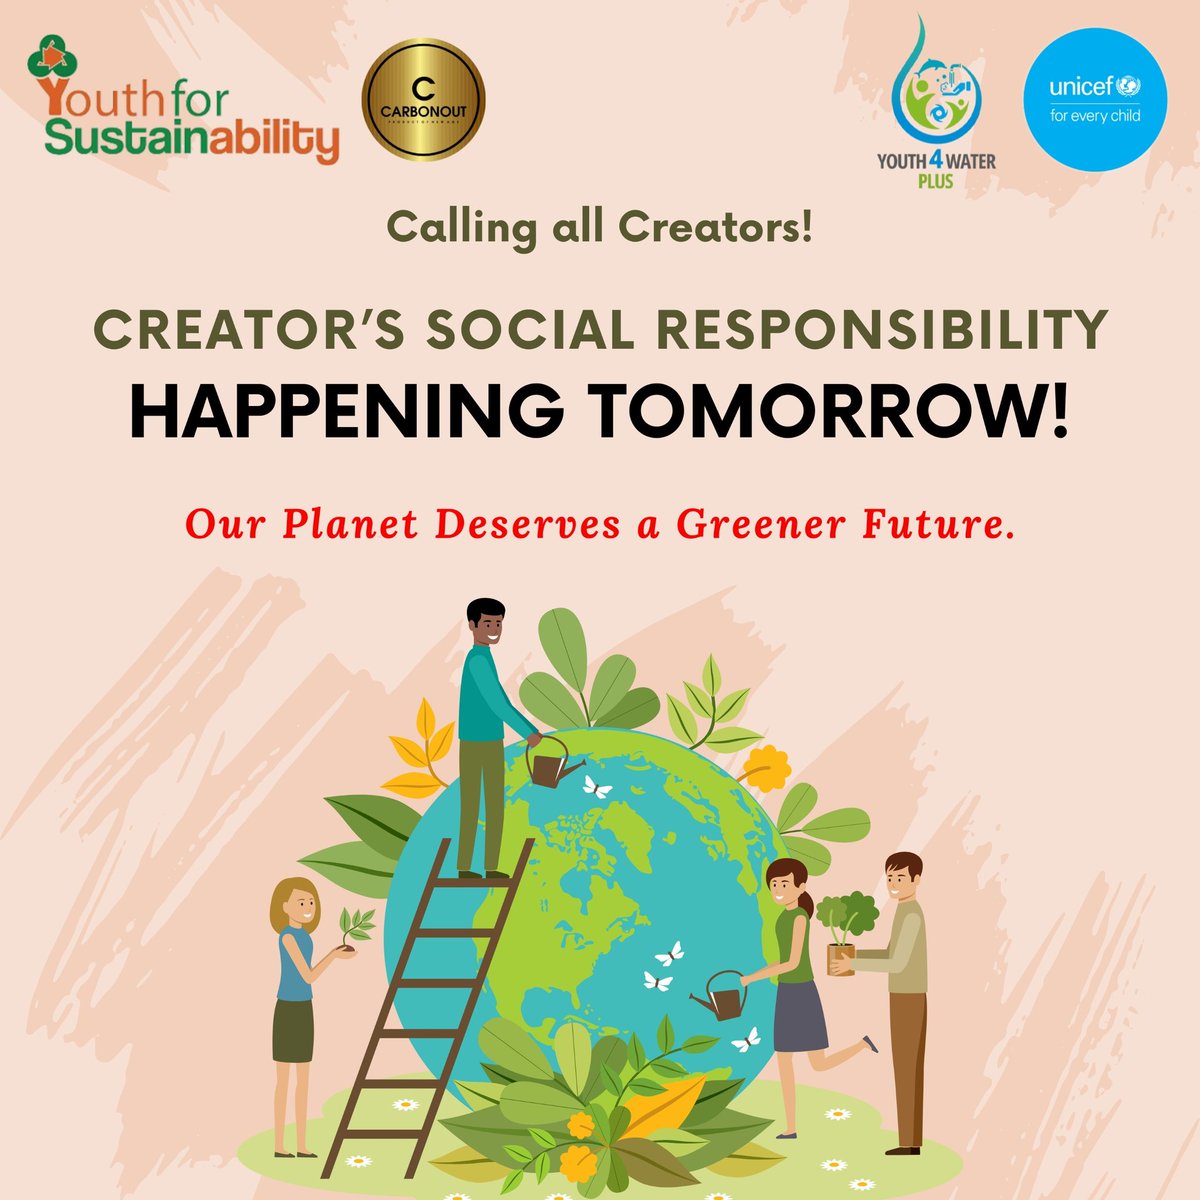 Creator's Social Responsibility happening tomorrow. Let's use our creativity to inspire a sustainable future.

#creatorsforclimate #creatorsforchange #youth4waterplus #youthempowerment